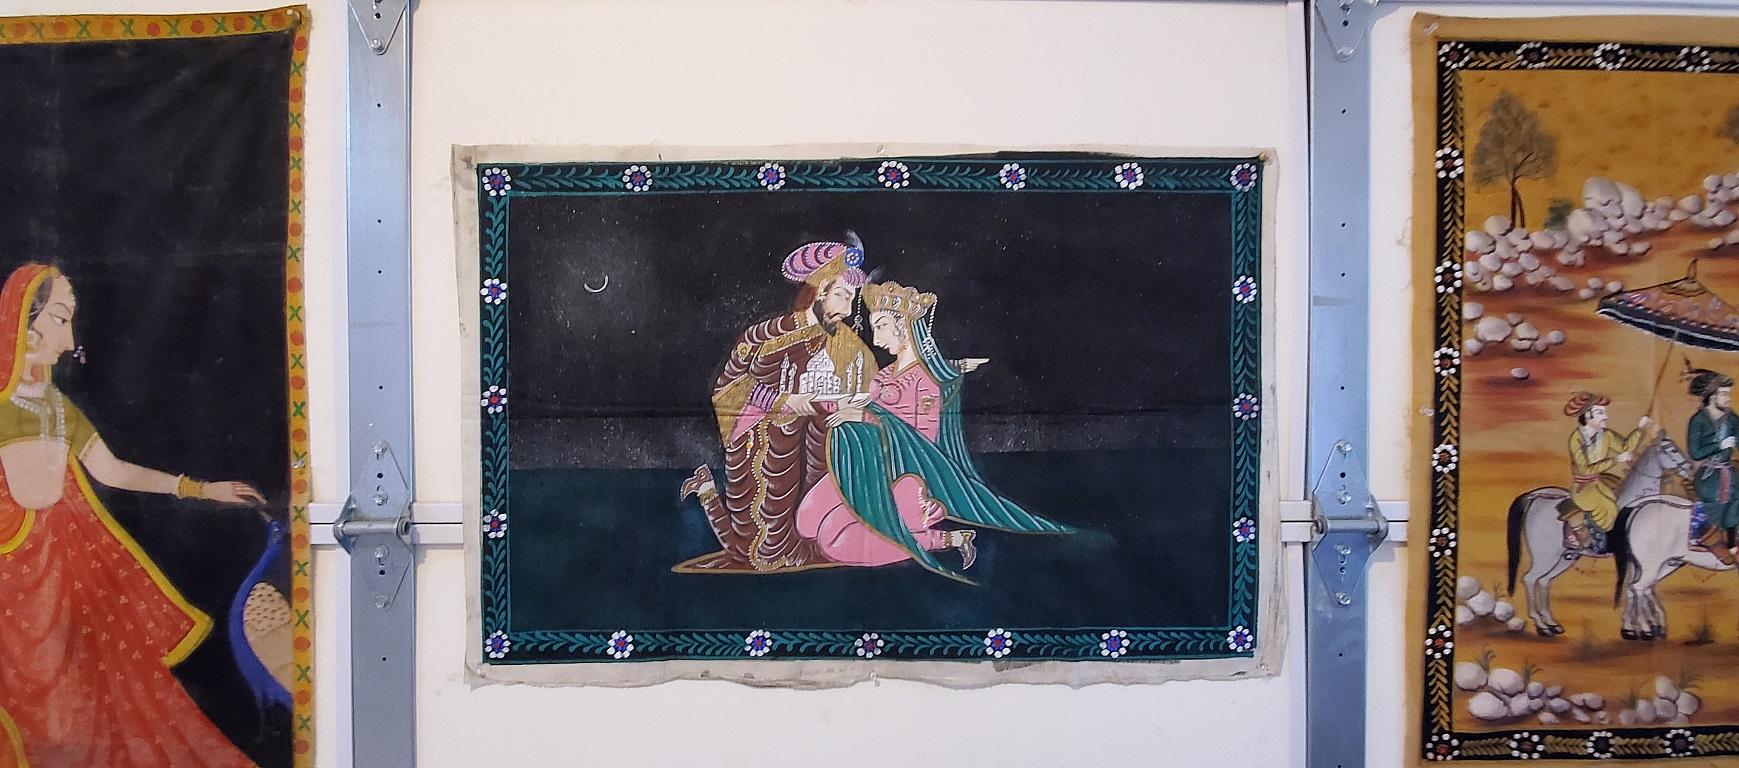 Presenting a beautiful and iconic vintage Indian tapestry of Shah Jahan and Mumtaz Mahal.

We are of the opinion that this is from the early 20th century, circa 1920.

Made of cotton and hand painted with an image of Shah Jahan and Mumtaz Mahal,